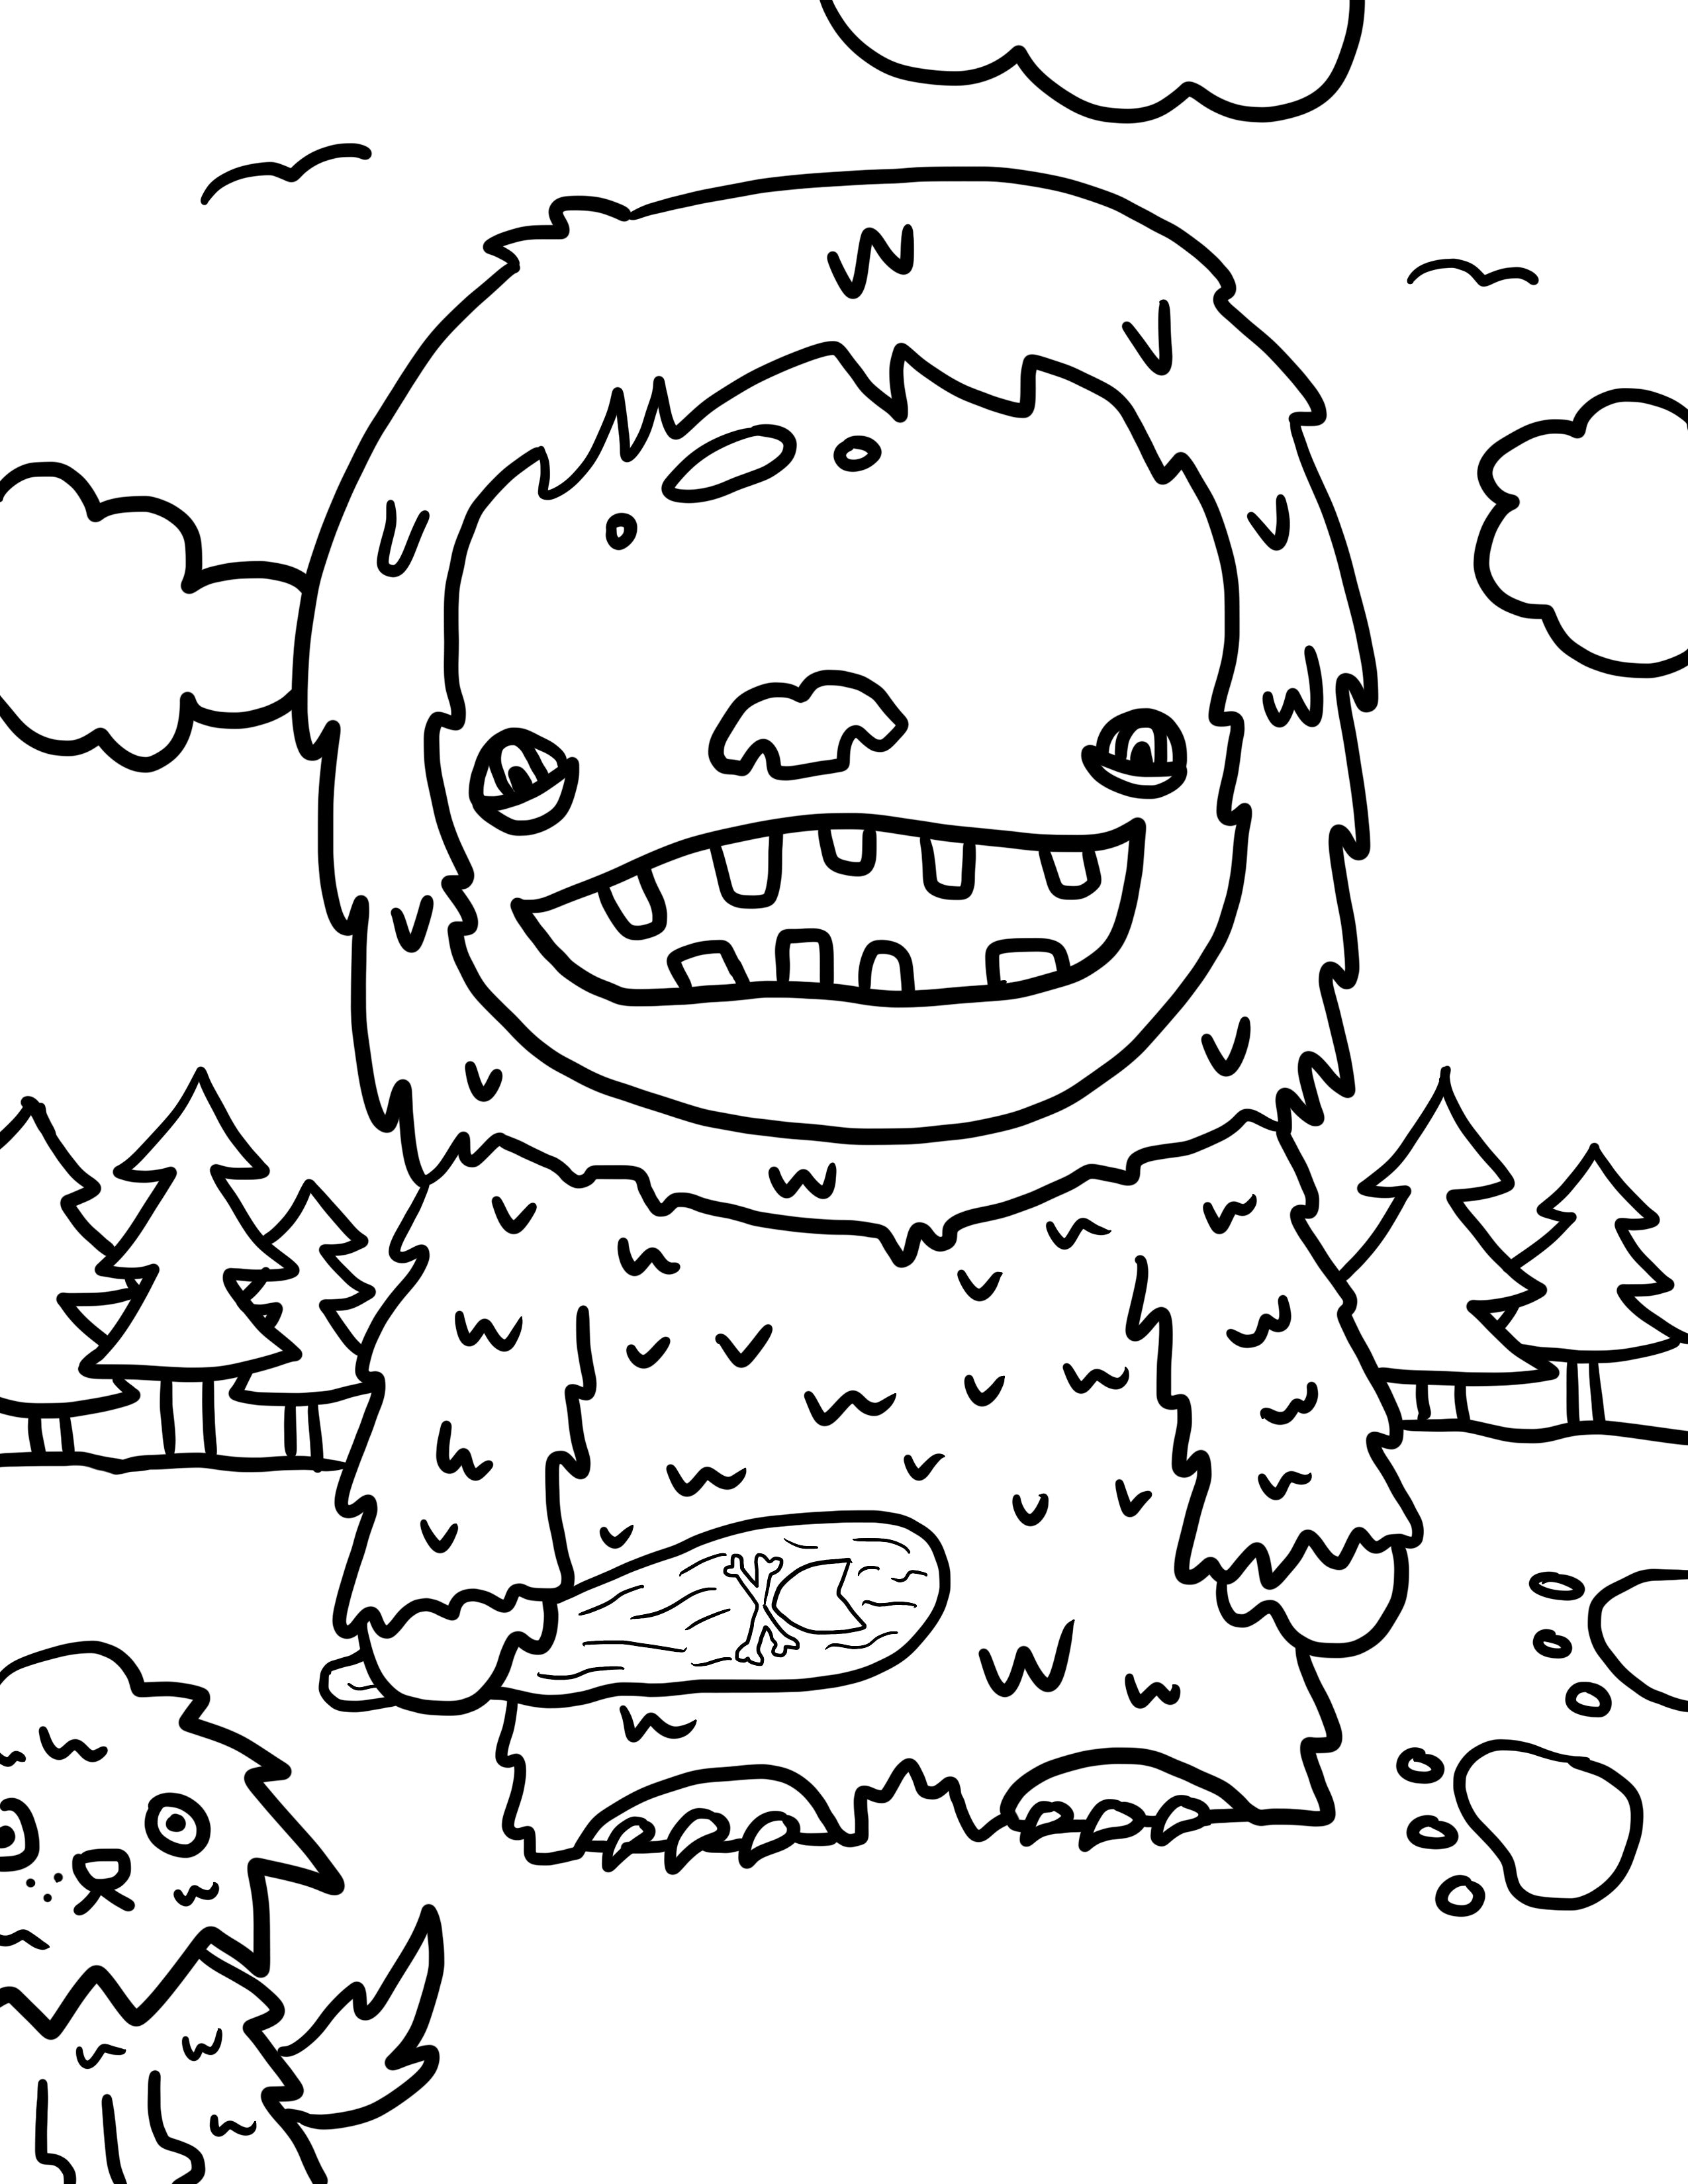 Colouring pages â crywolf